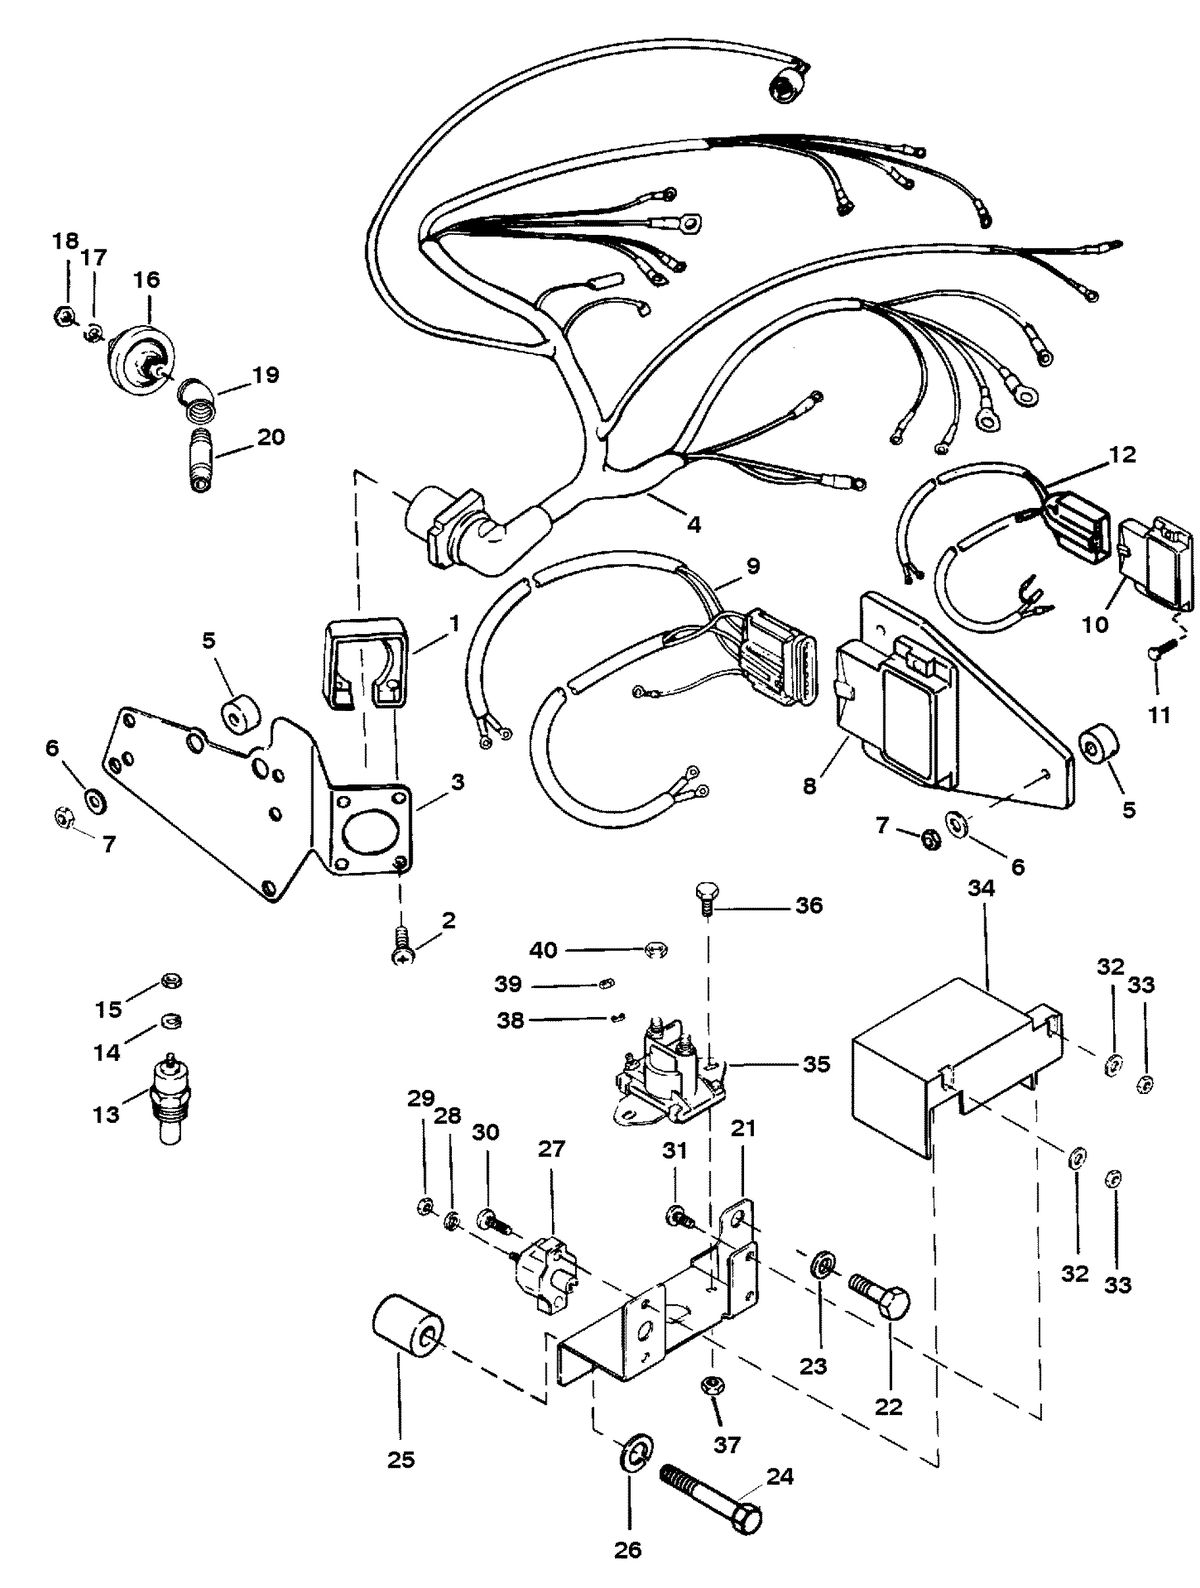 MERCRUISER 5.7L INBOARD ENGINE WIRING HARNESS AND ELECTRICAL COMPONENTS